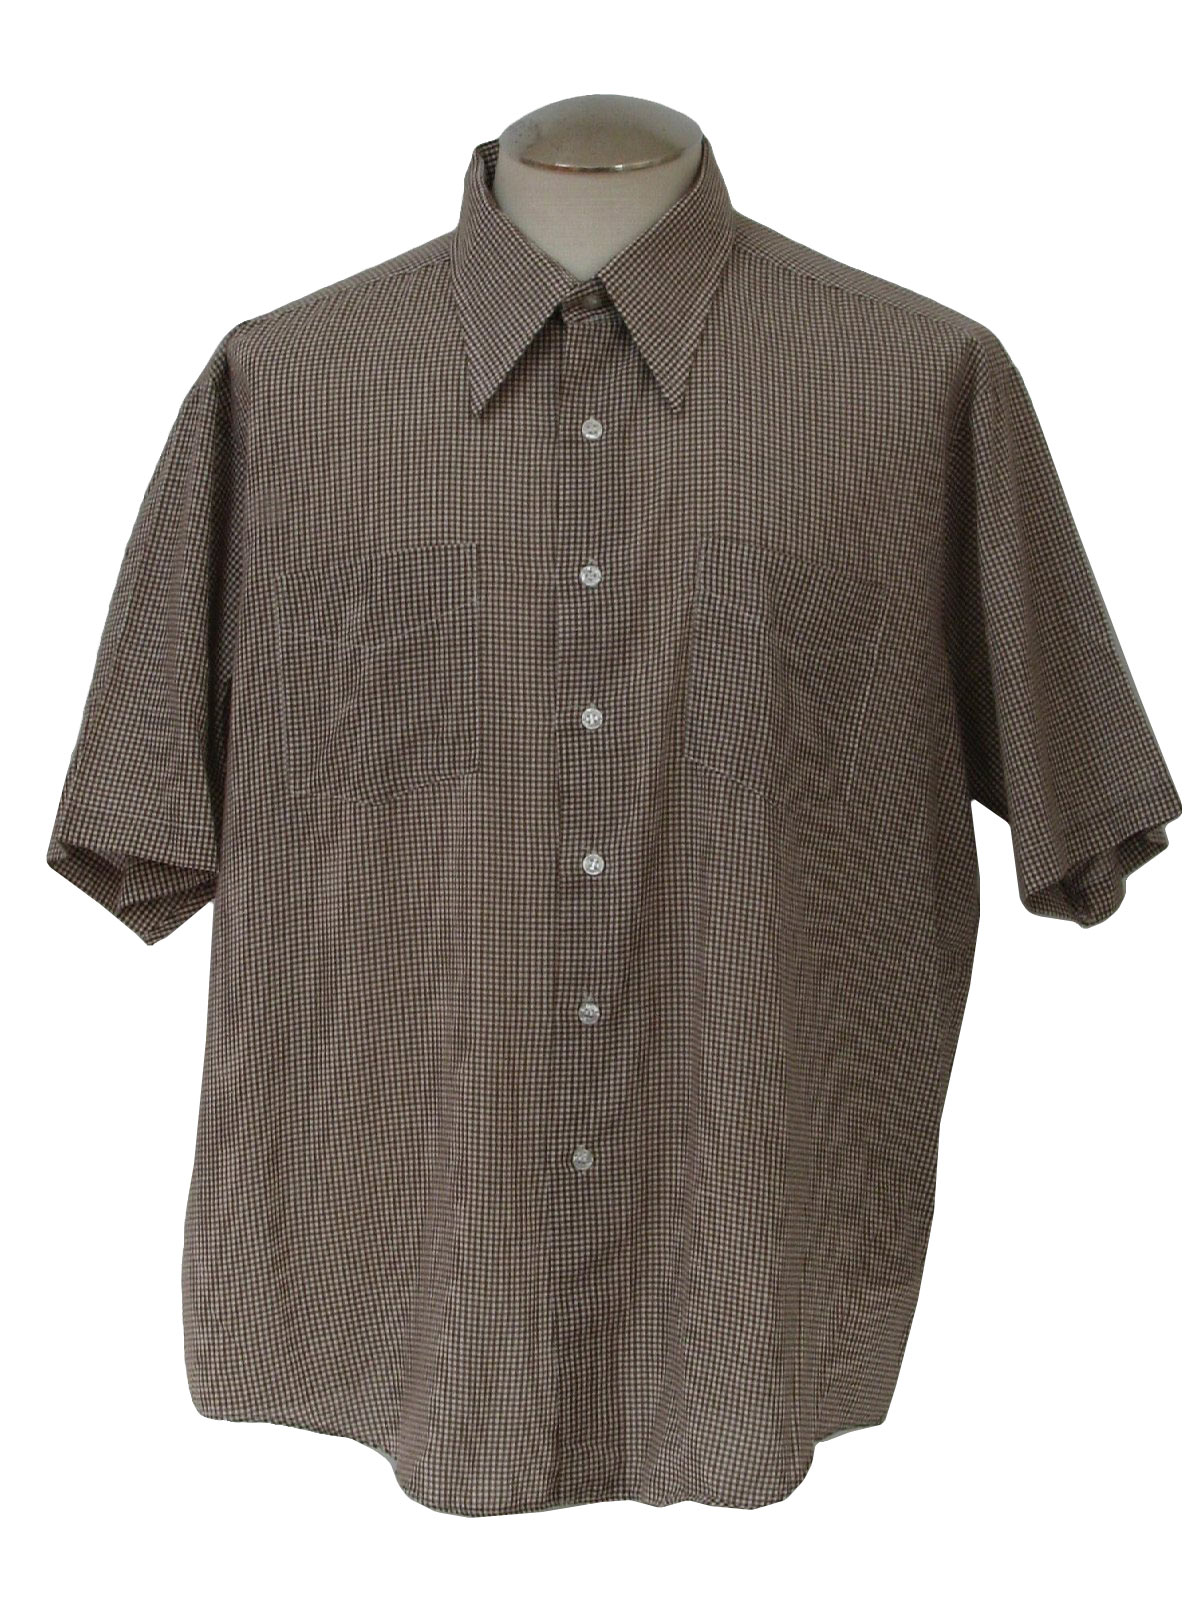 Vintage 70s Shirt: 70s -Man Fit Campus- Mens brown and white tight ...